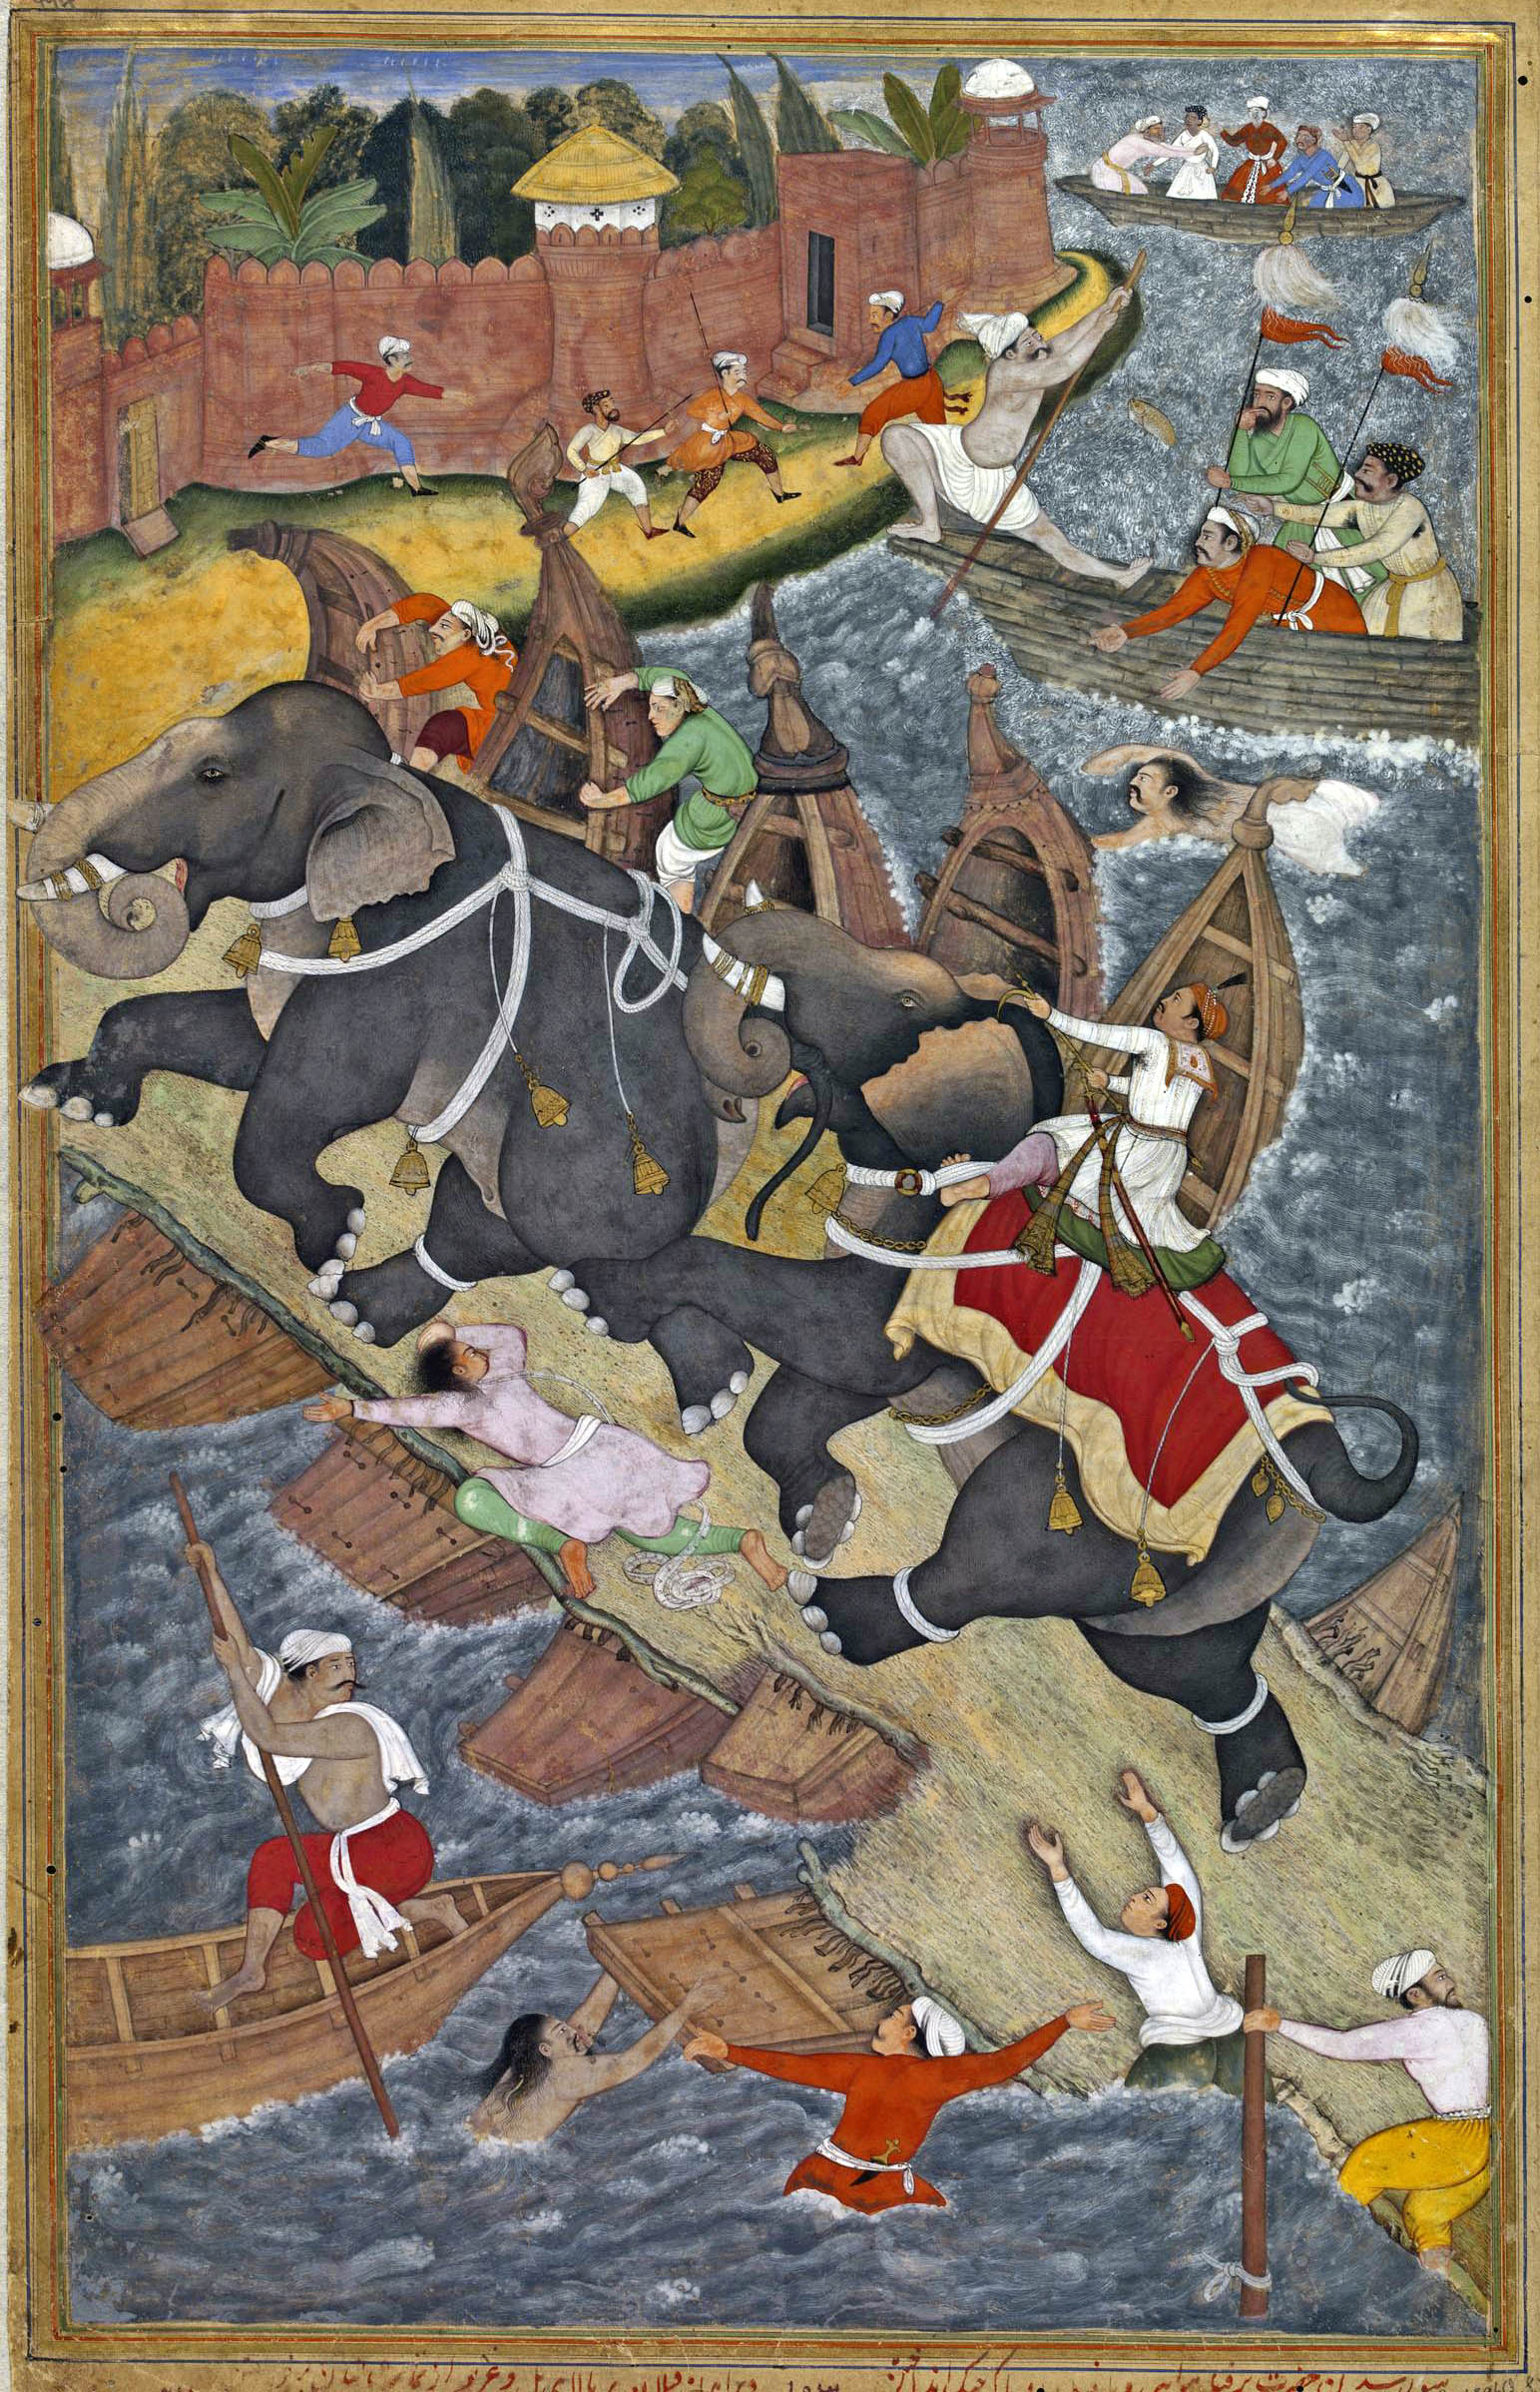 The Elephant in Early Mughal India